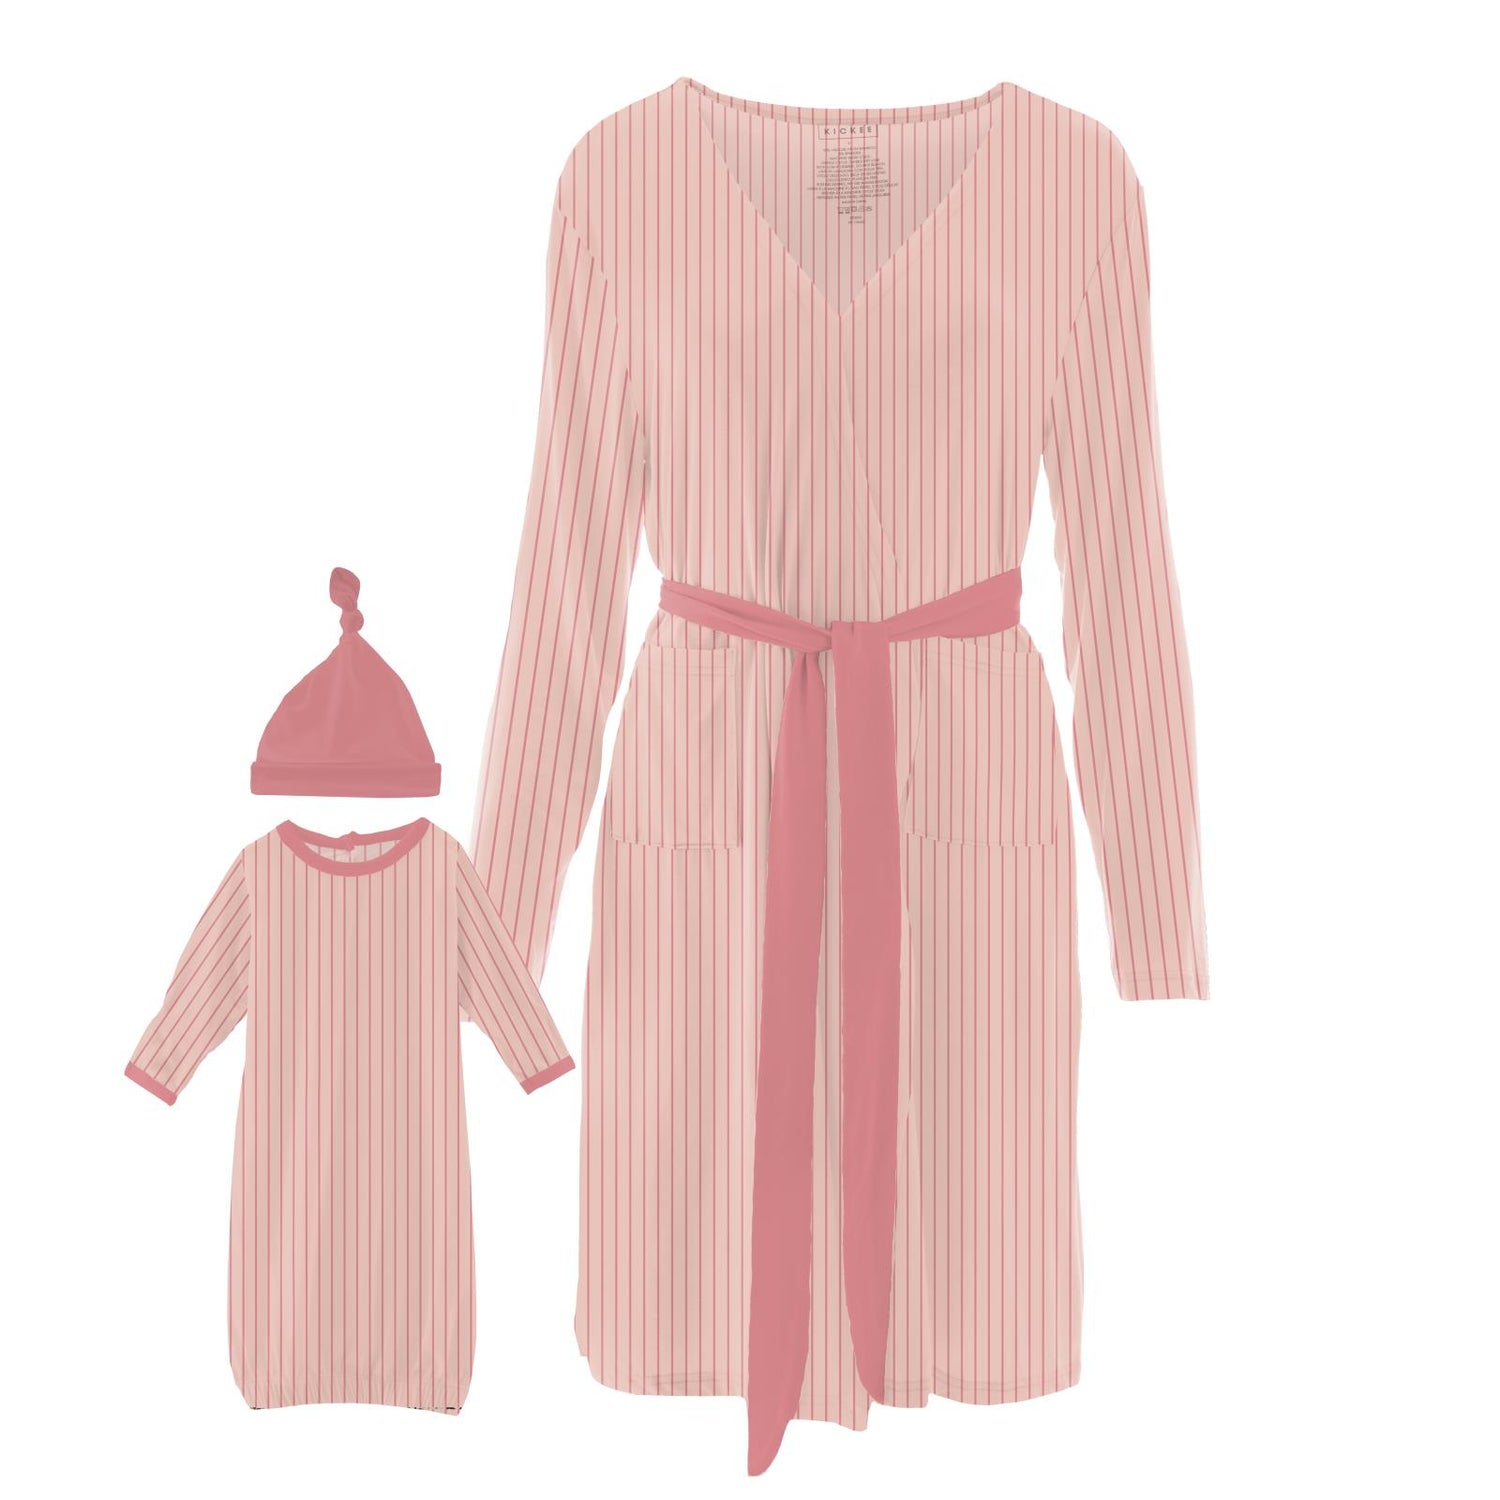 Women's Print Mid Length Lounge Robe & Layette Gown Set in Pinstripe